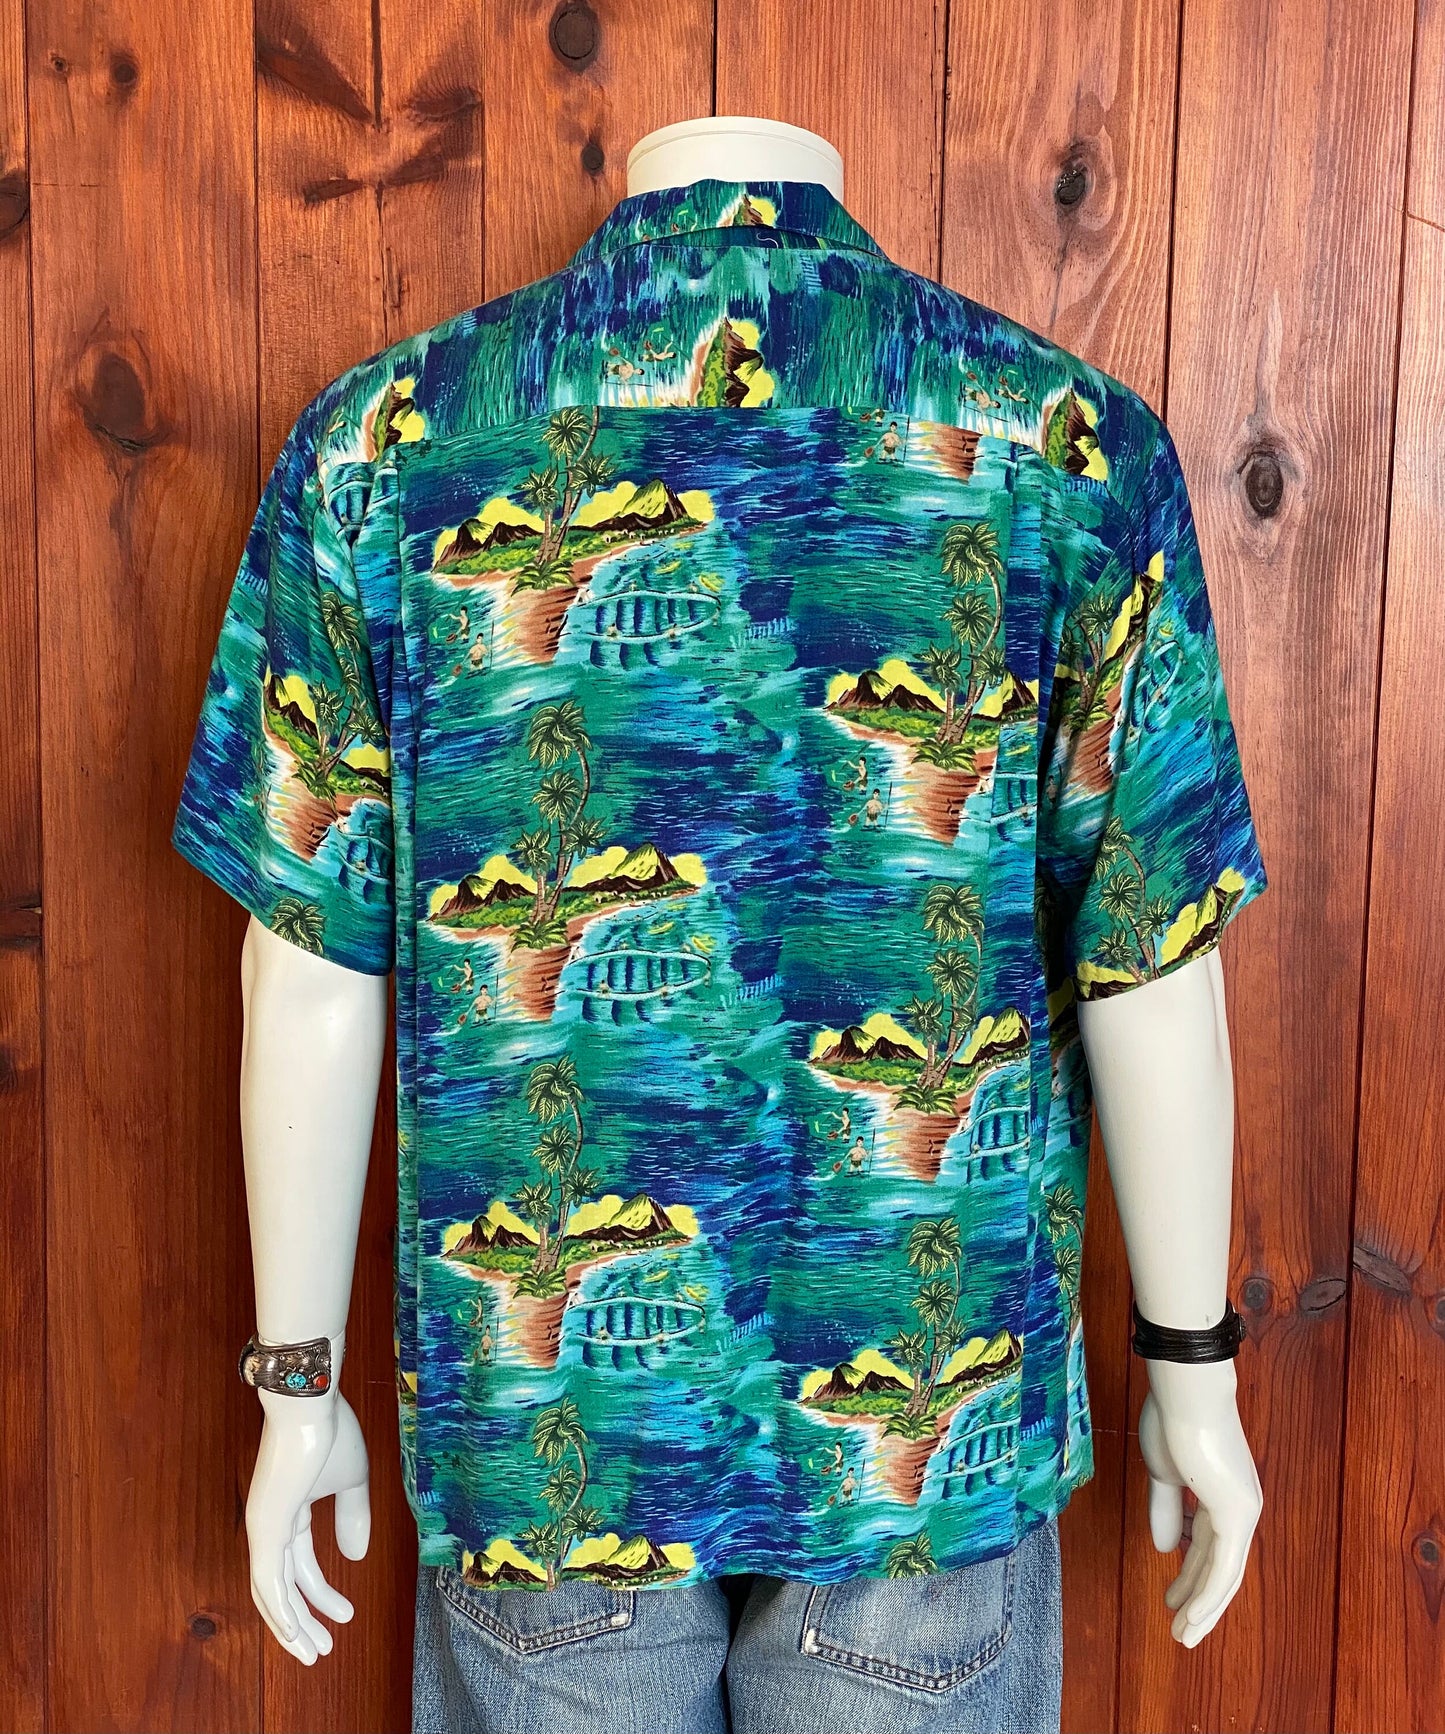 Vintage 90s Hawaiian rayon shirt by Ocean Current, size Medium - Authentic tropical style and lightweight comfort.